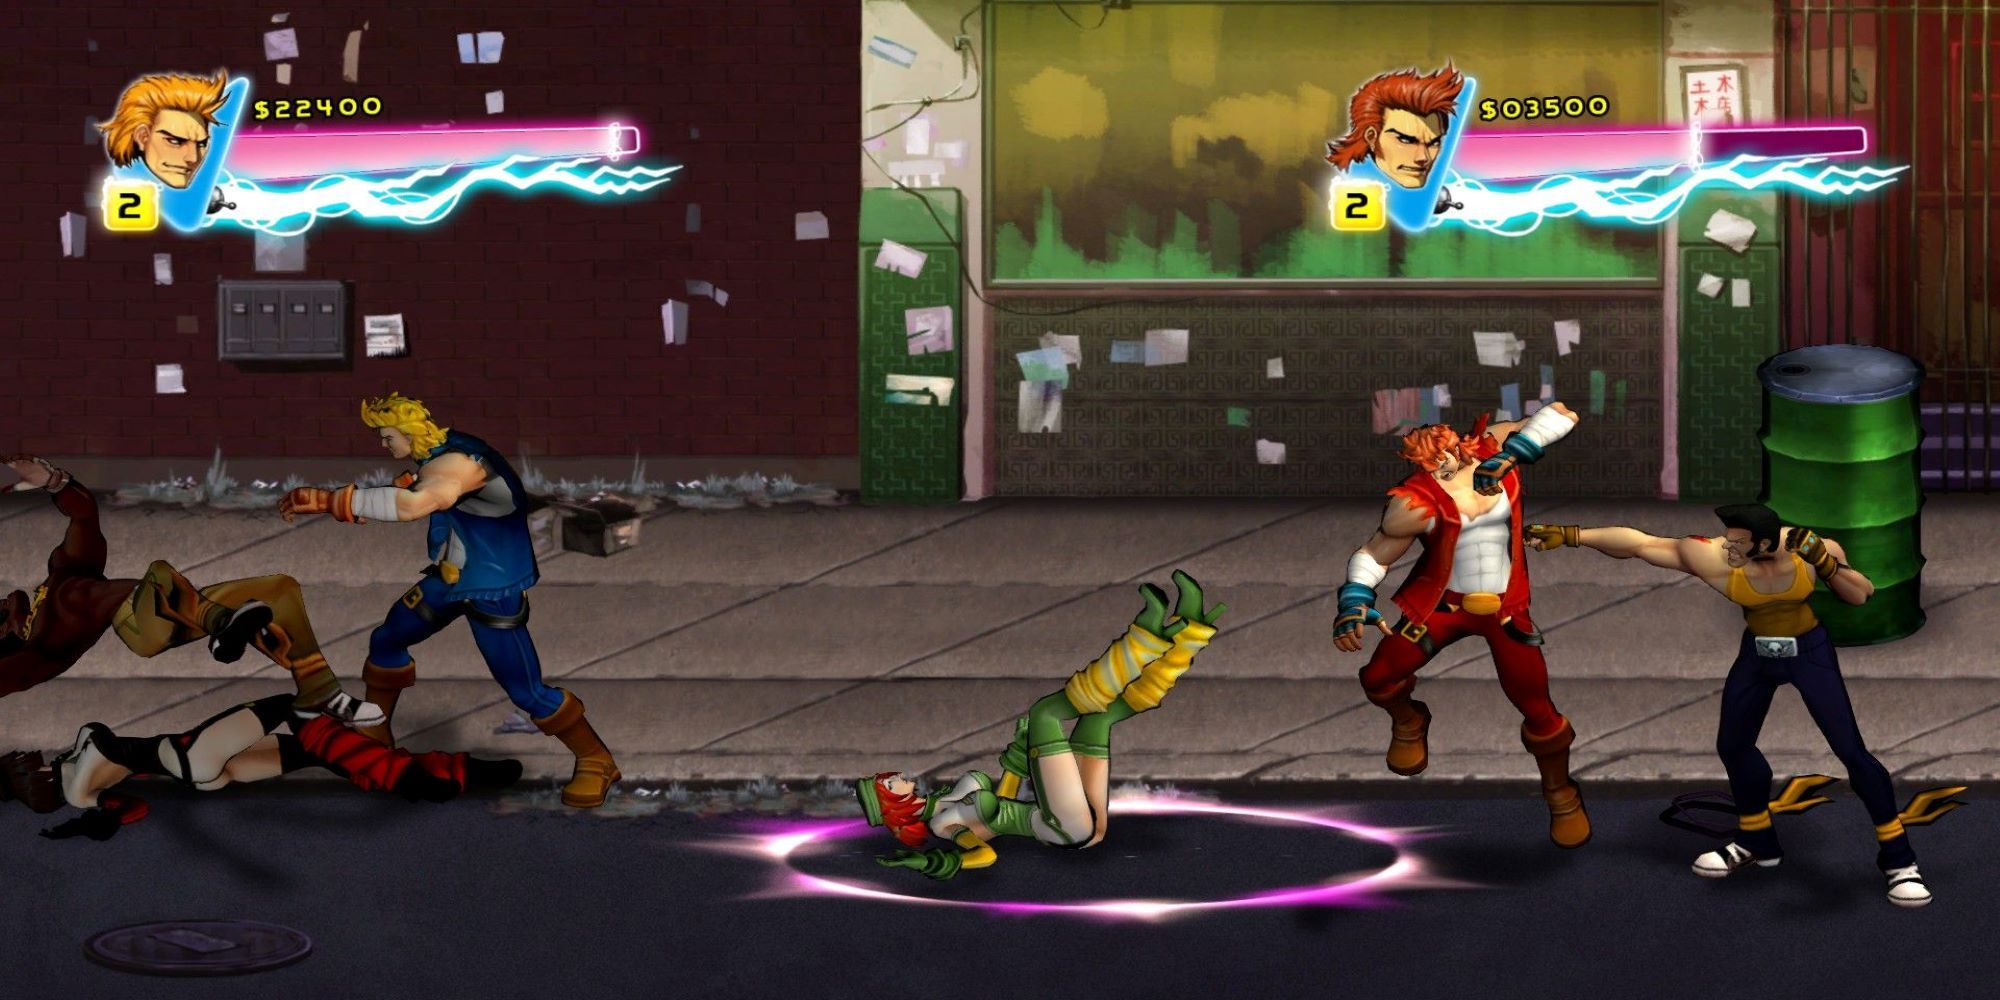 Billy And James beat up bad guys on the street in Double Dragon NEON.